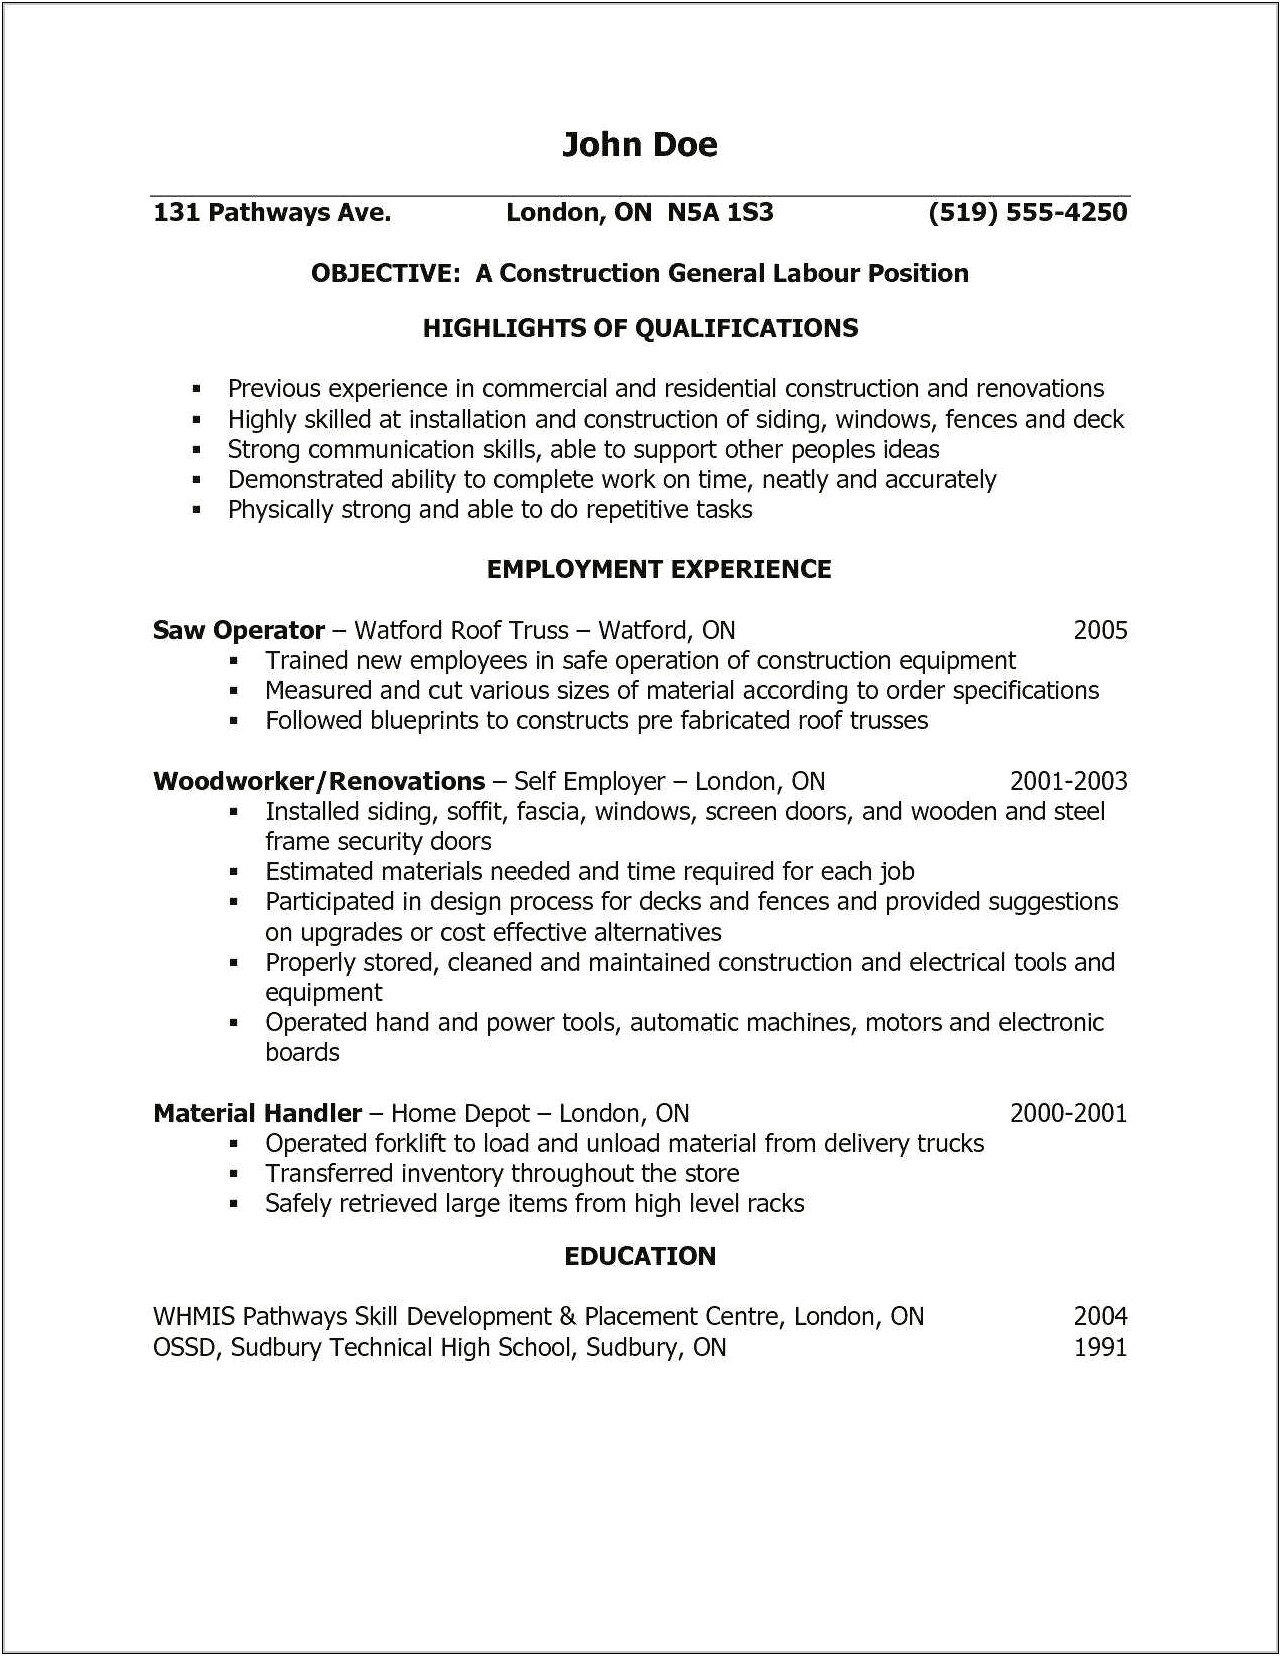 Resume Objective Statements For General Labor